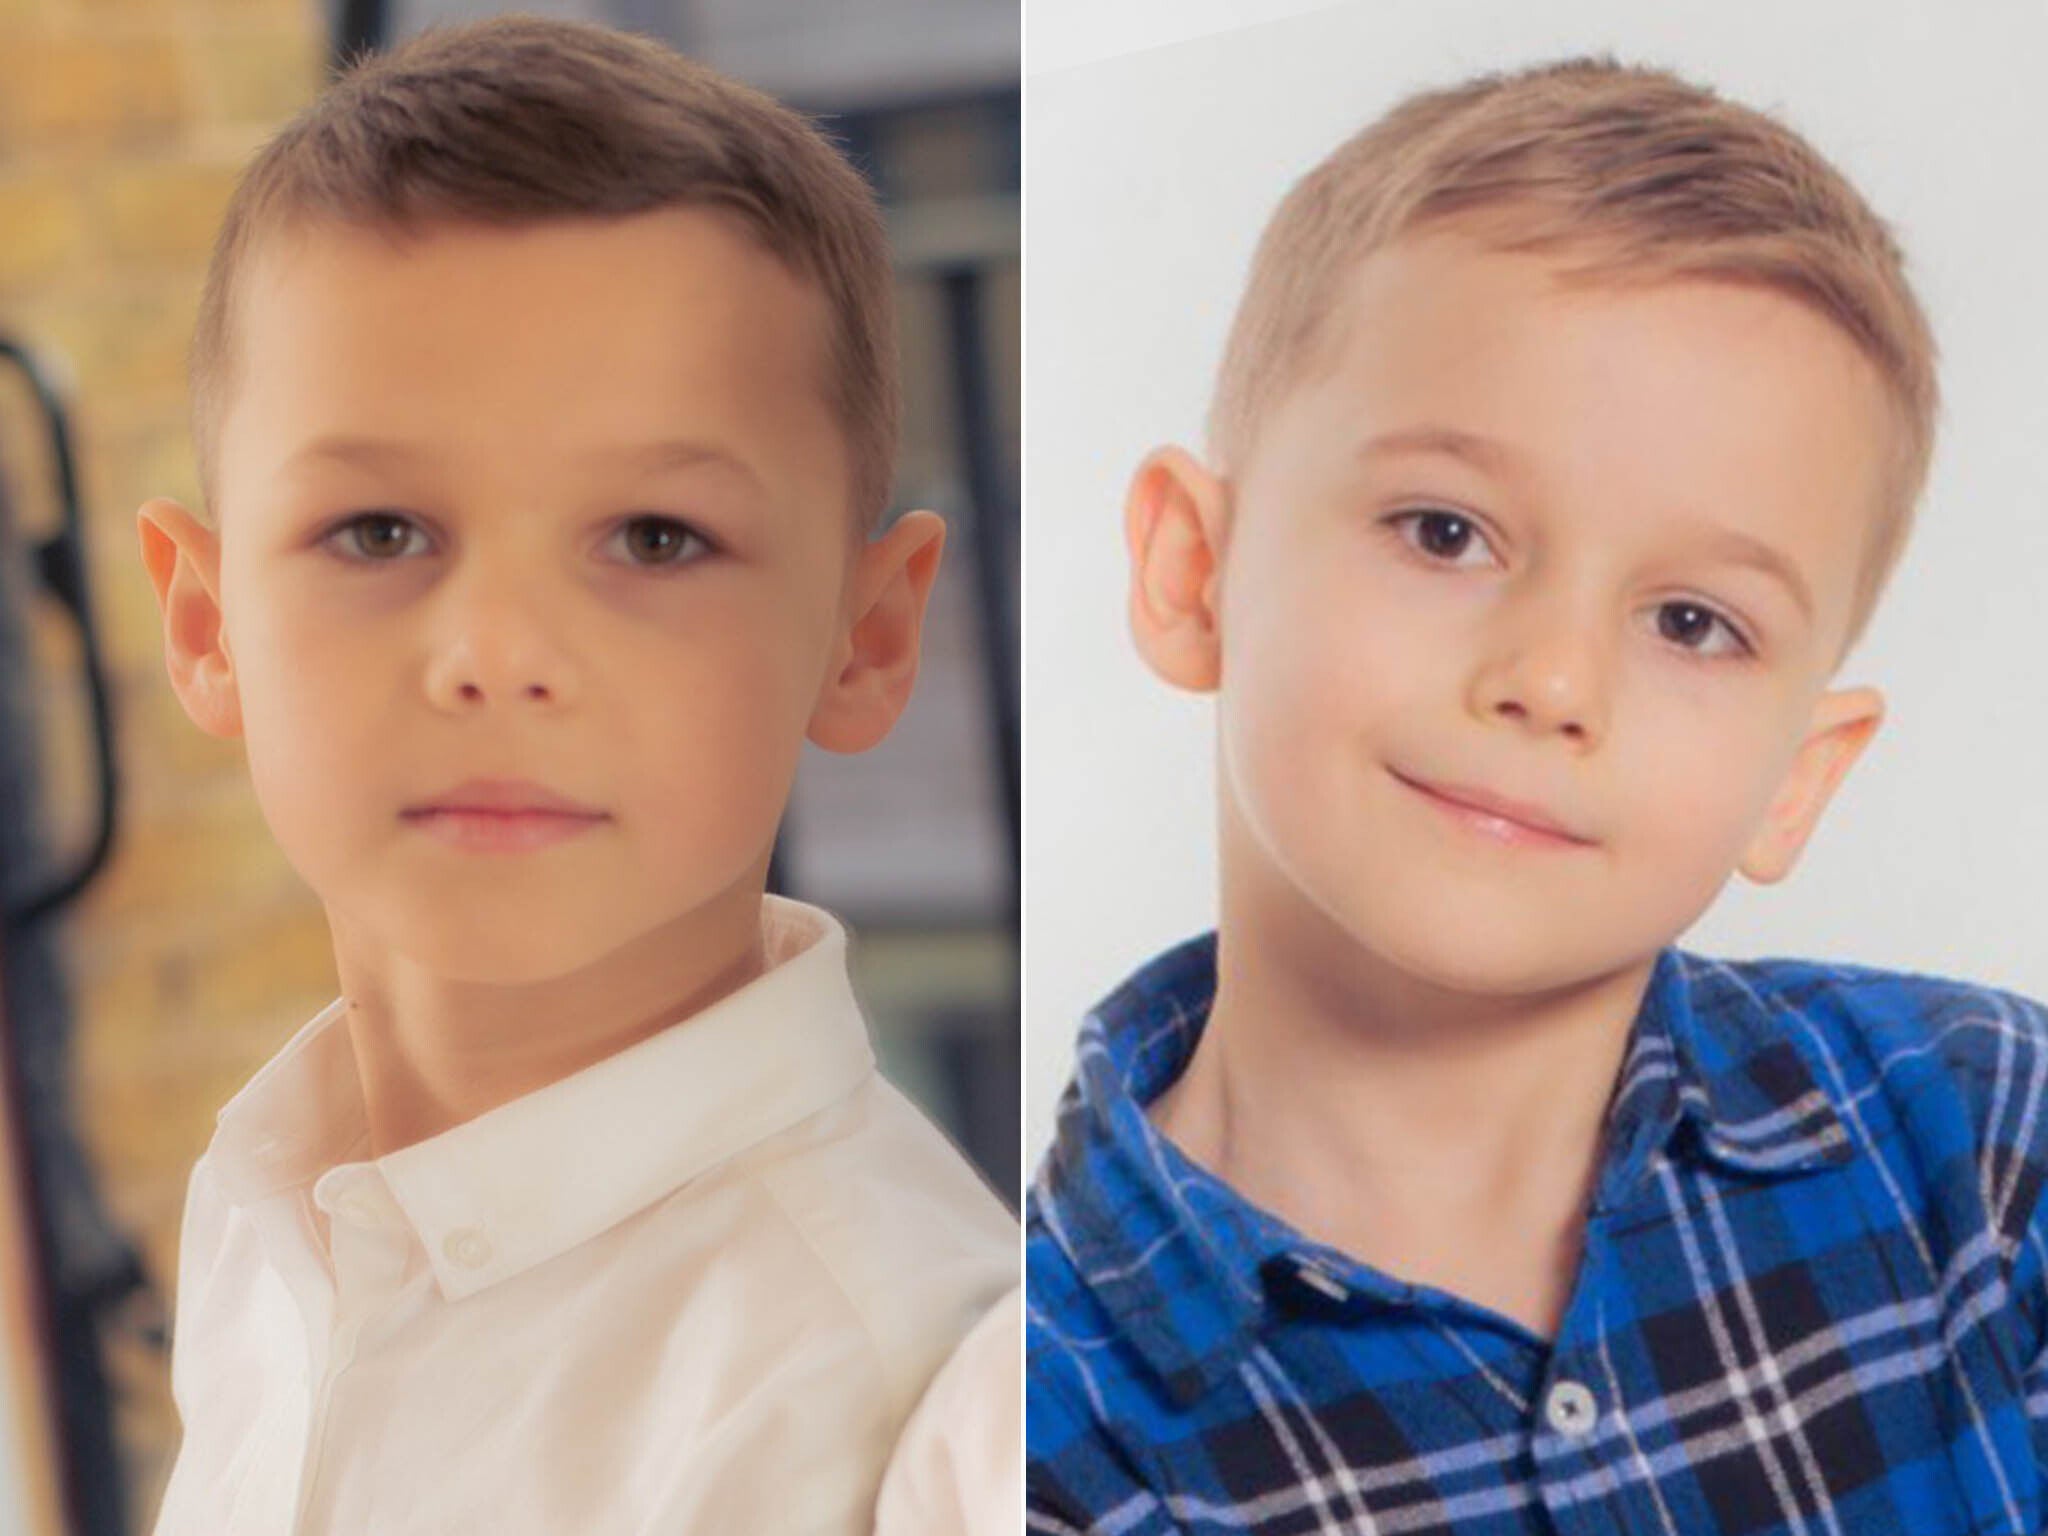 Alexander (L) and Maximus (R) were found dead in their home alongside their mother